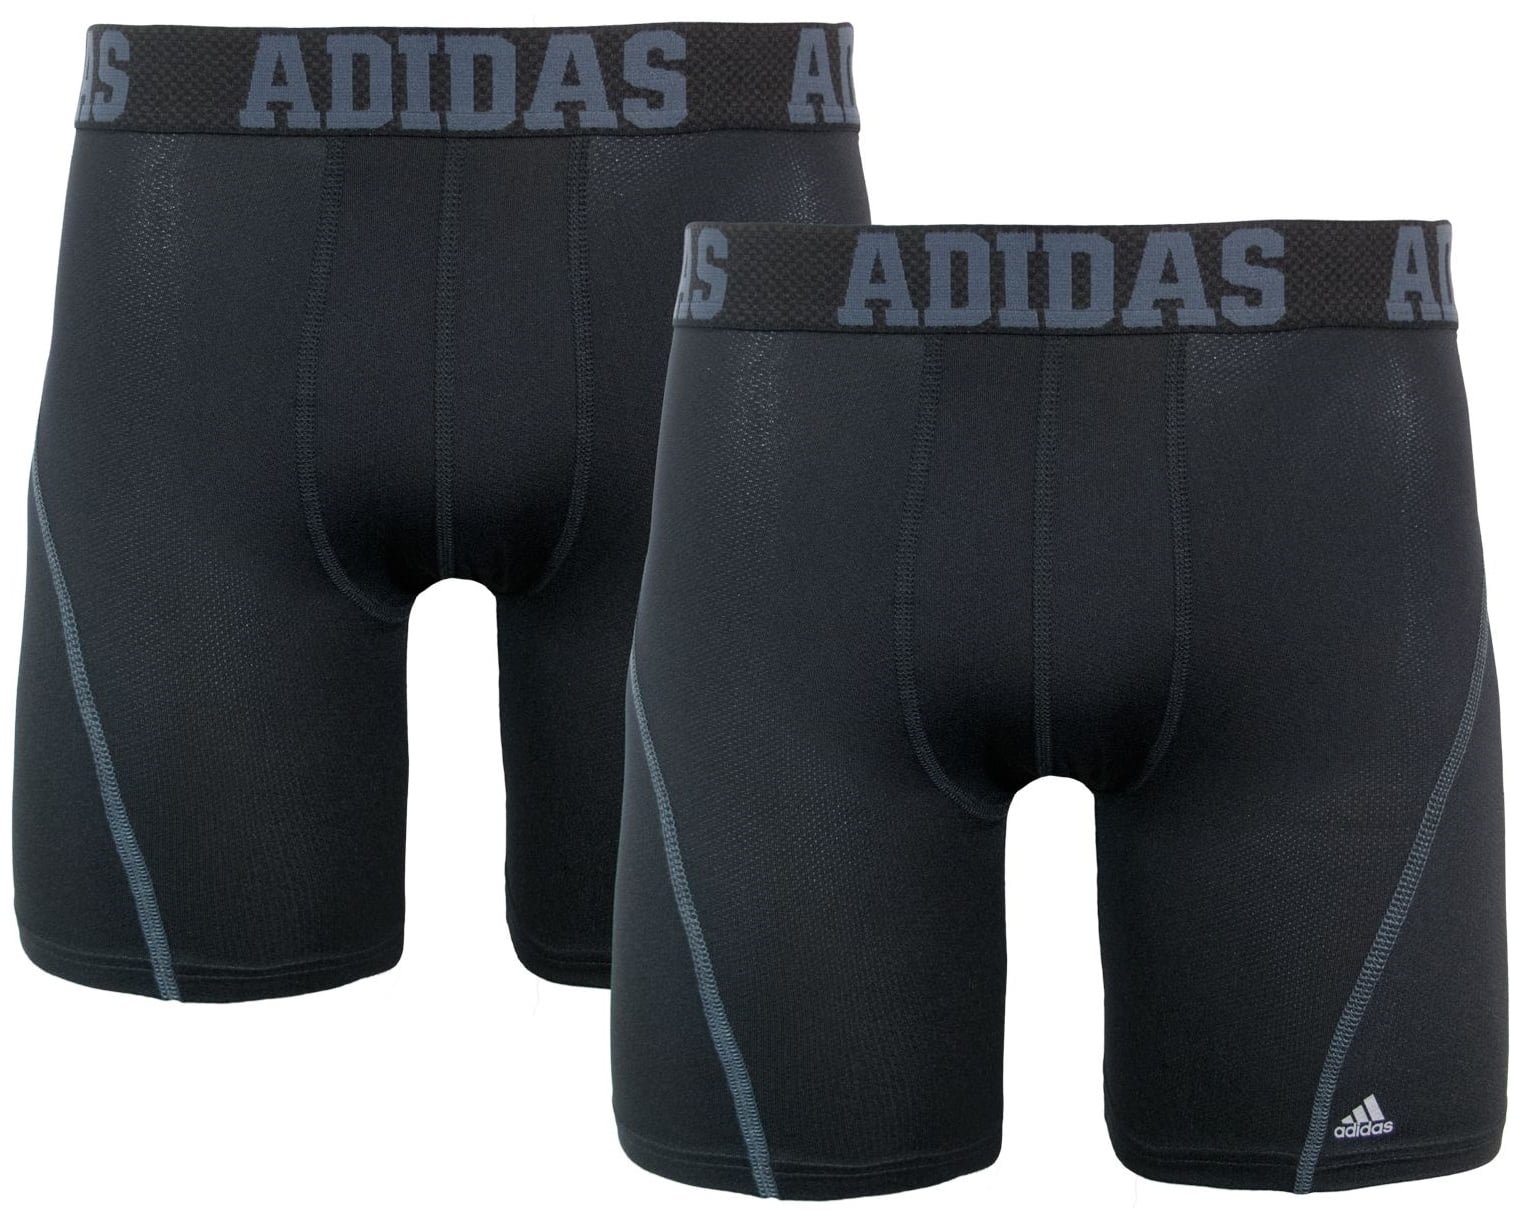 adidas men's climacool 7 midway briefs 7 pack